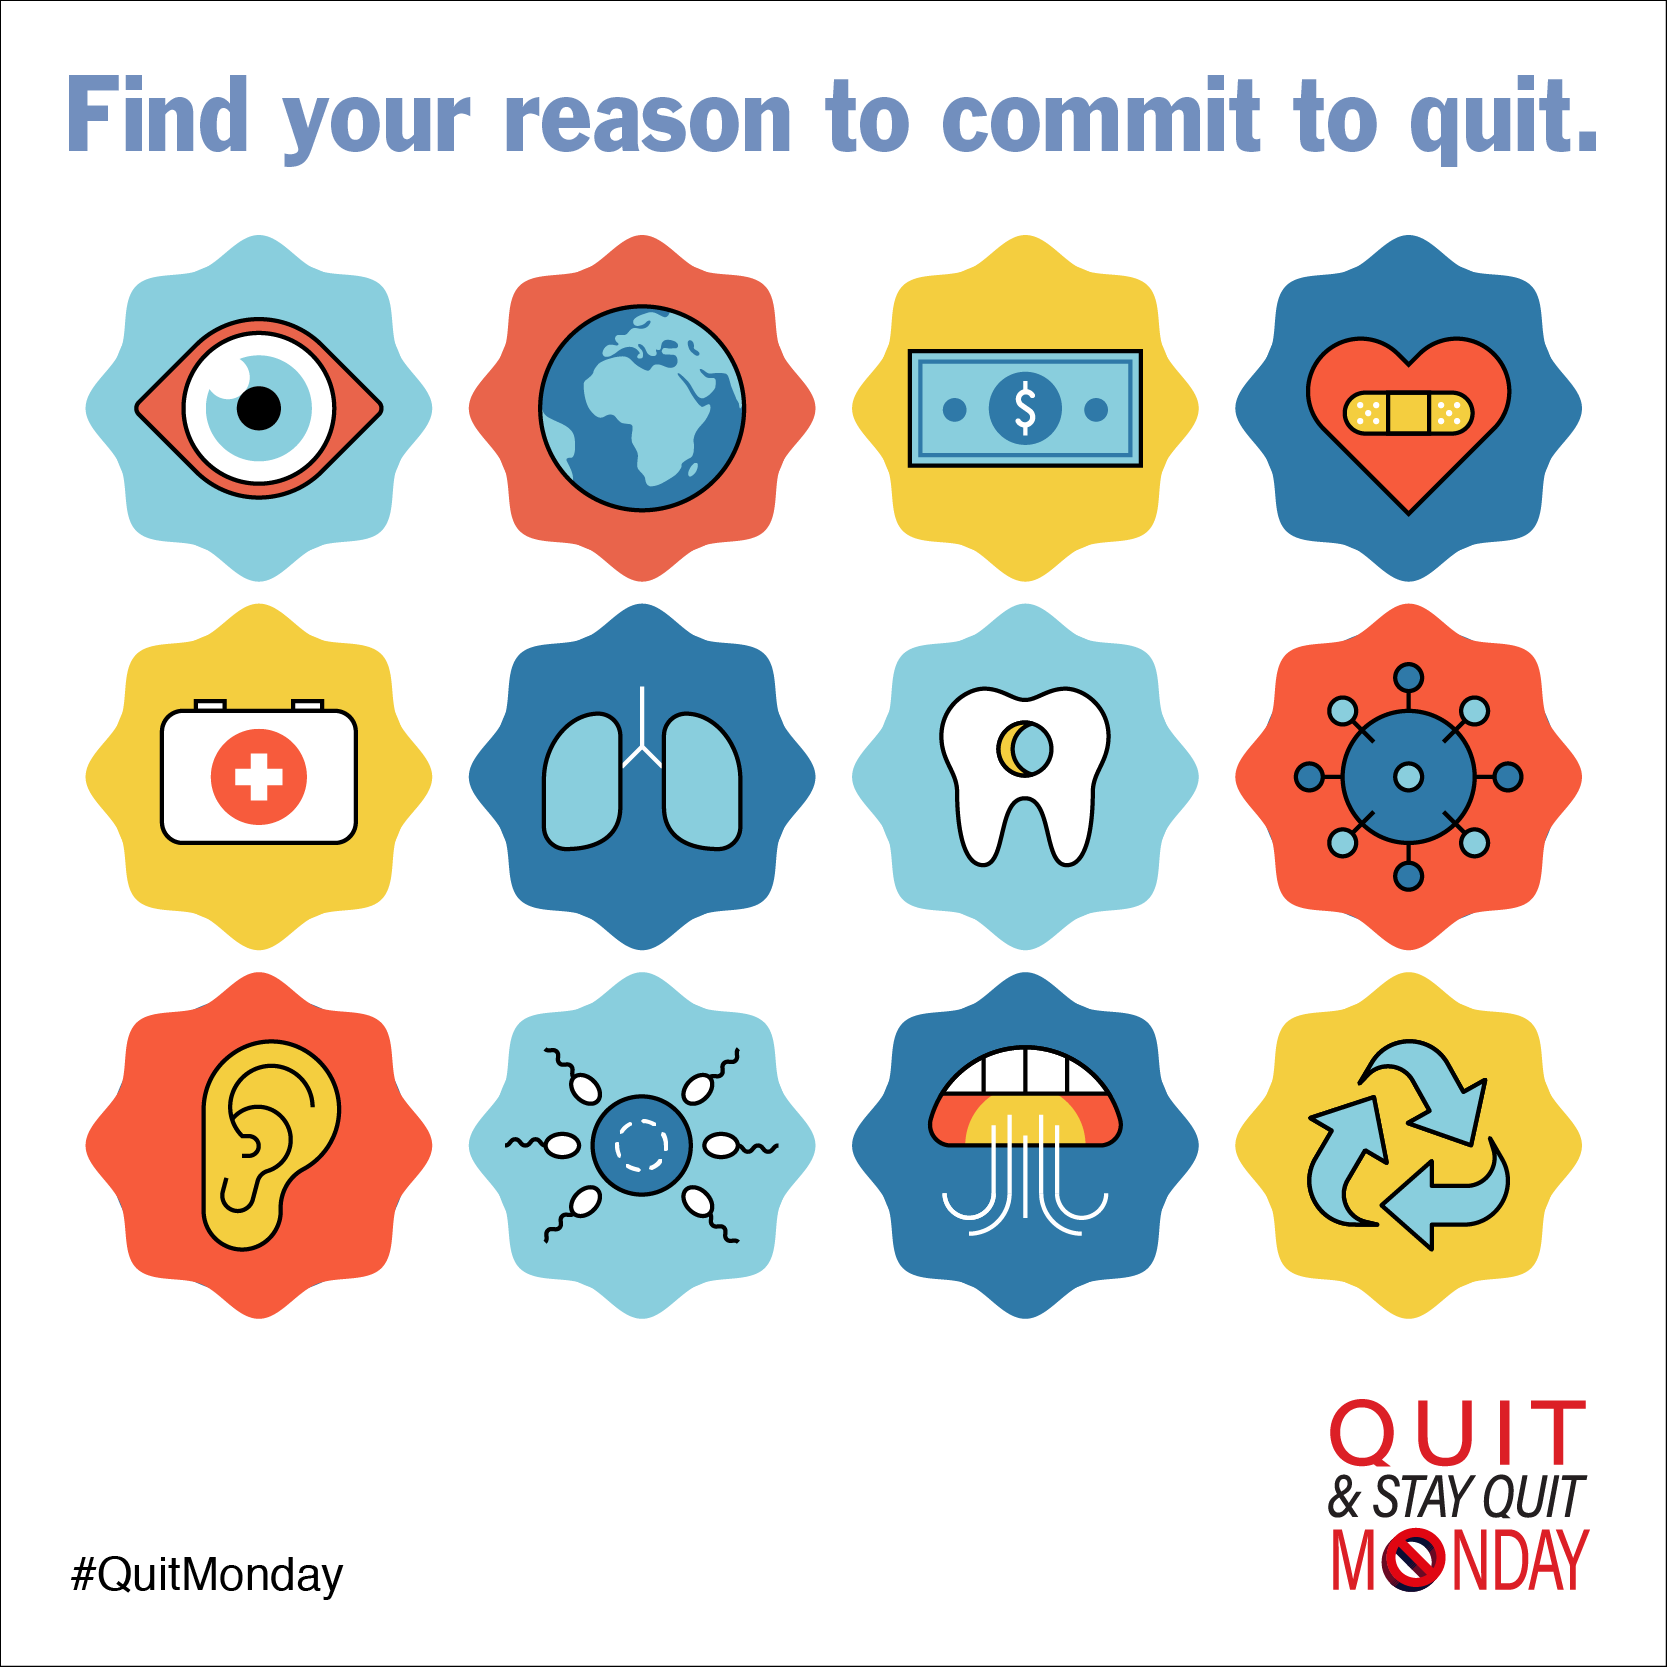 Find your reason to commit to quit